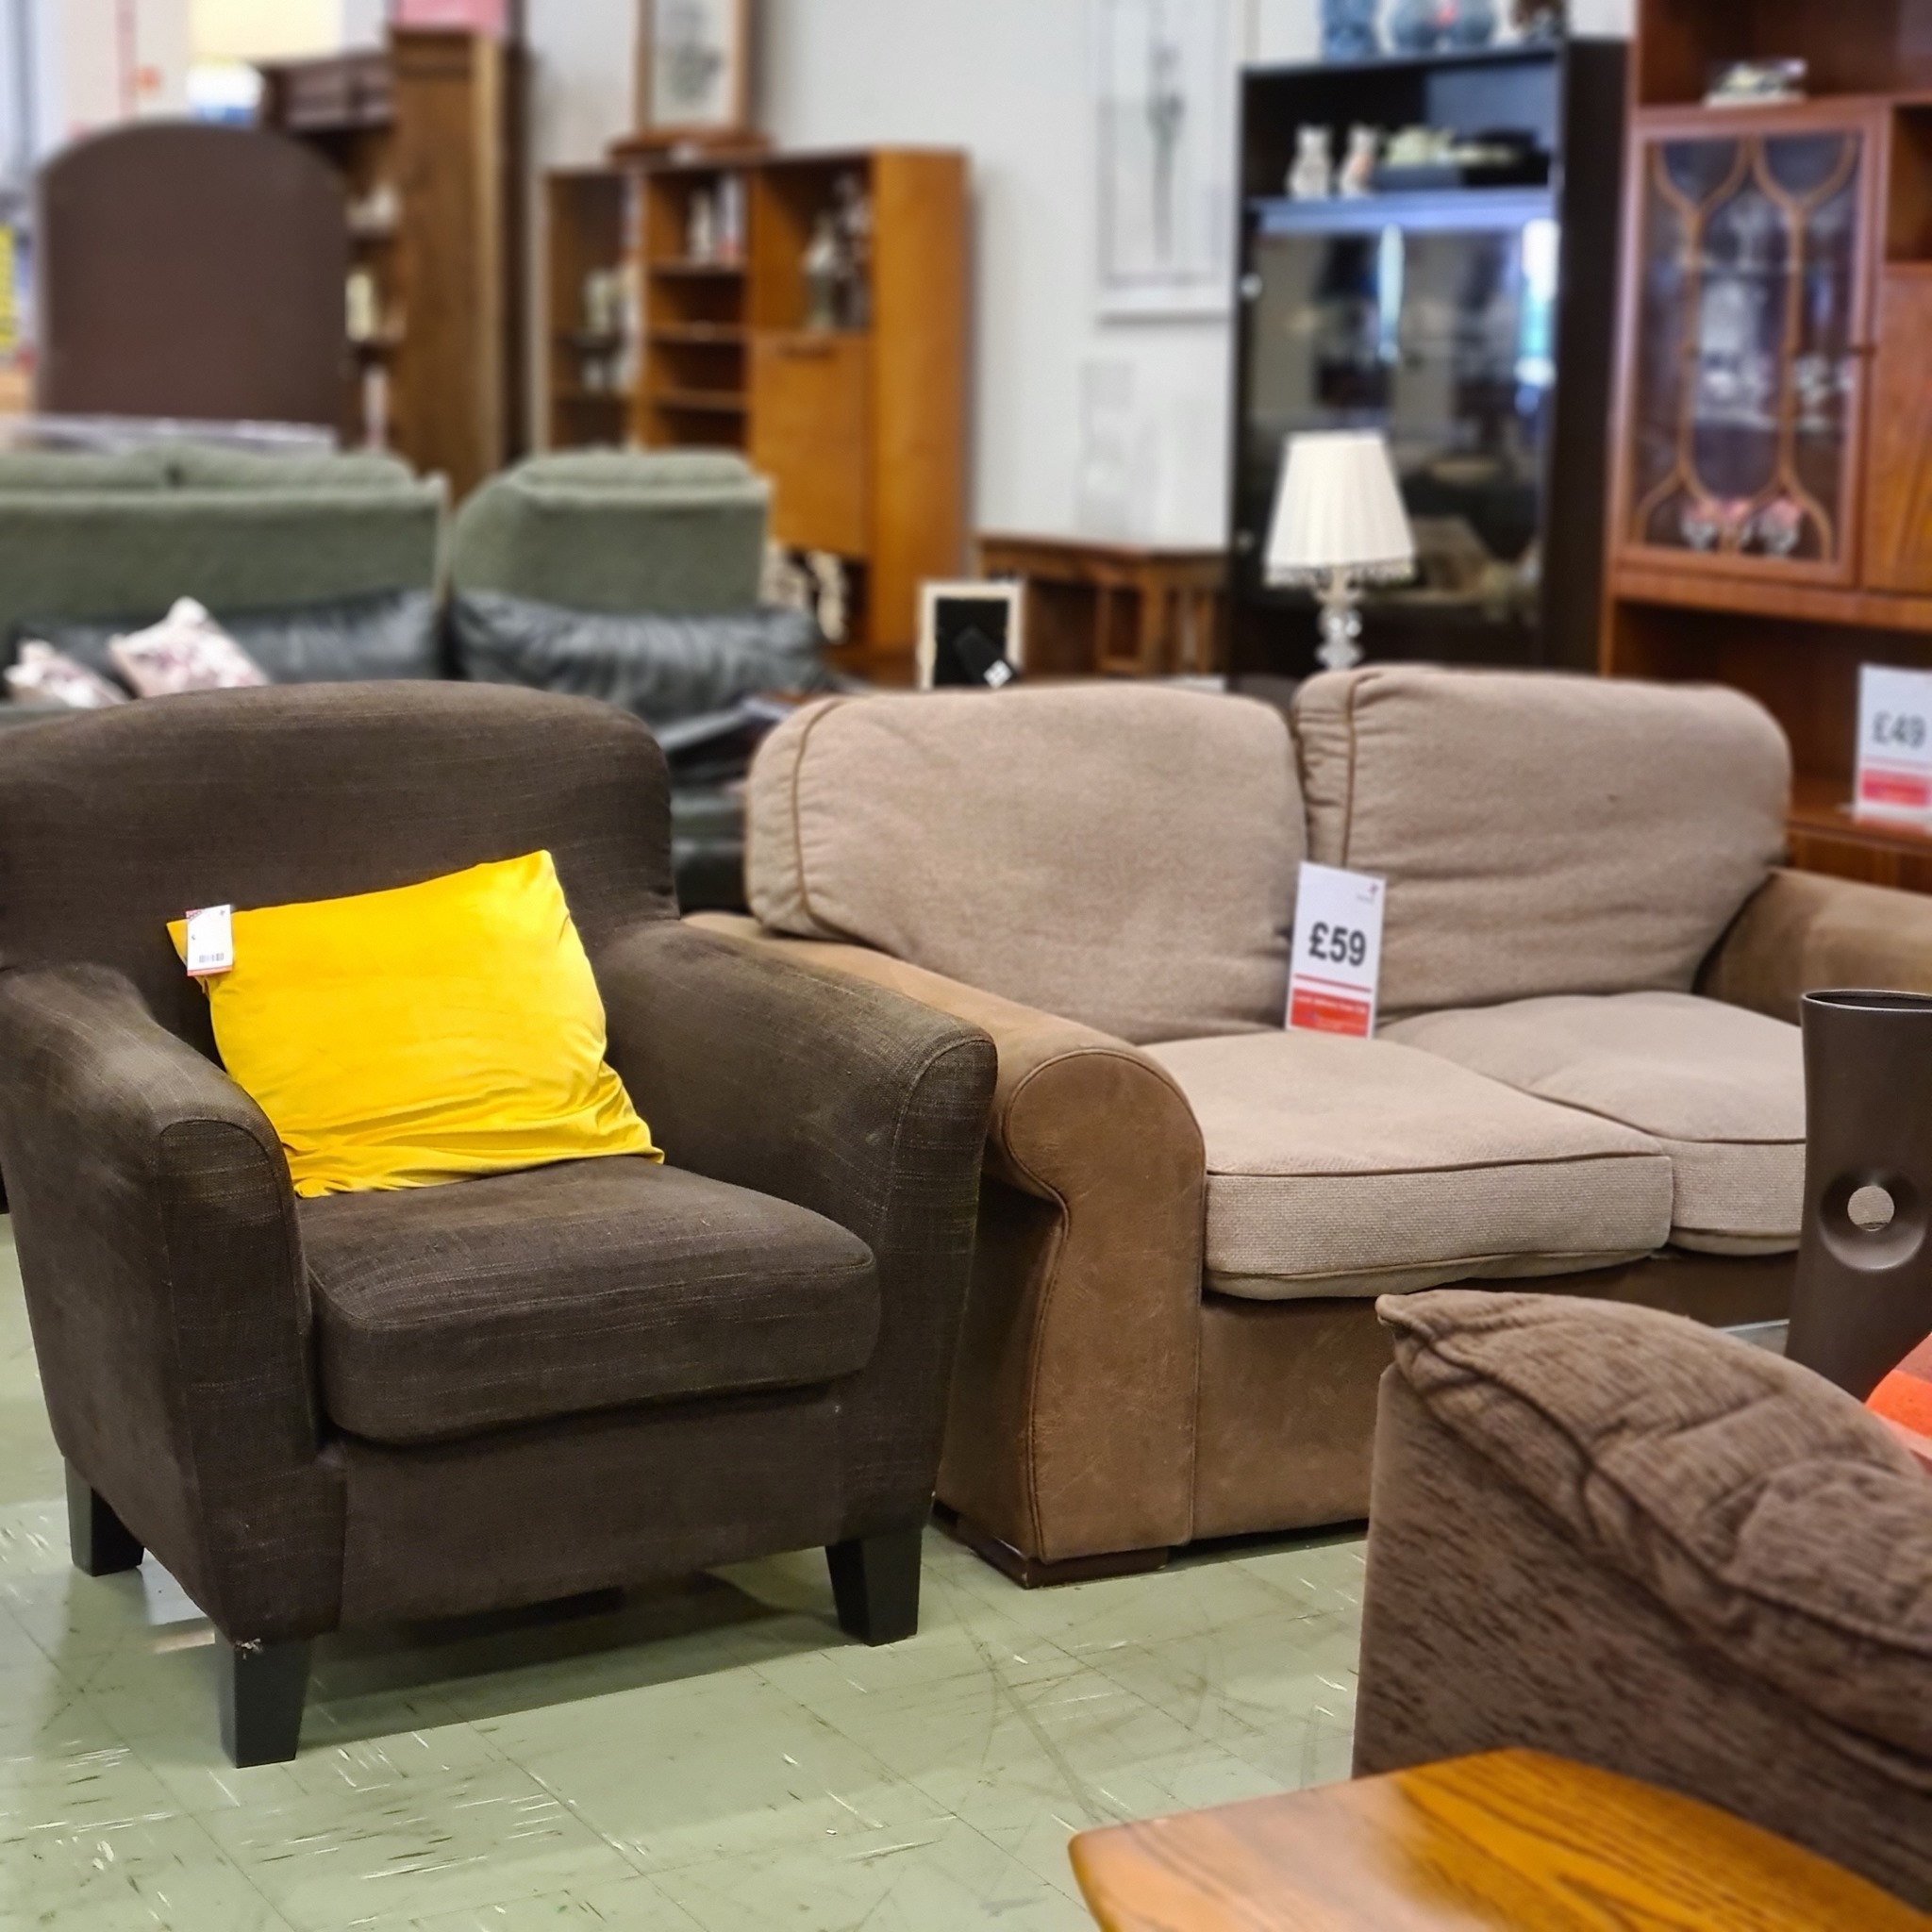 Second hand sofas in the Maidstone Shopping Outlet.